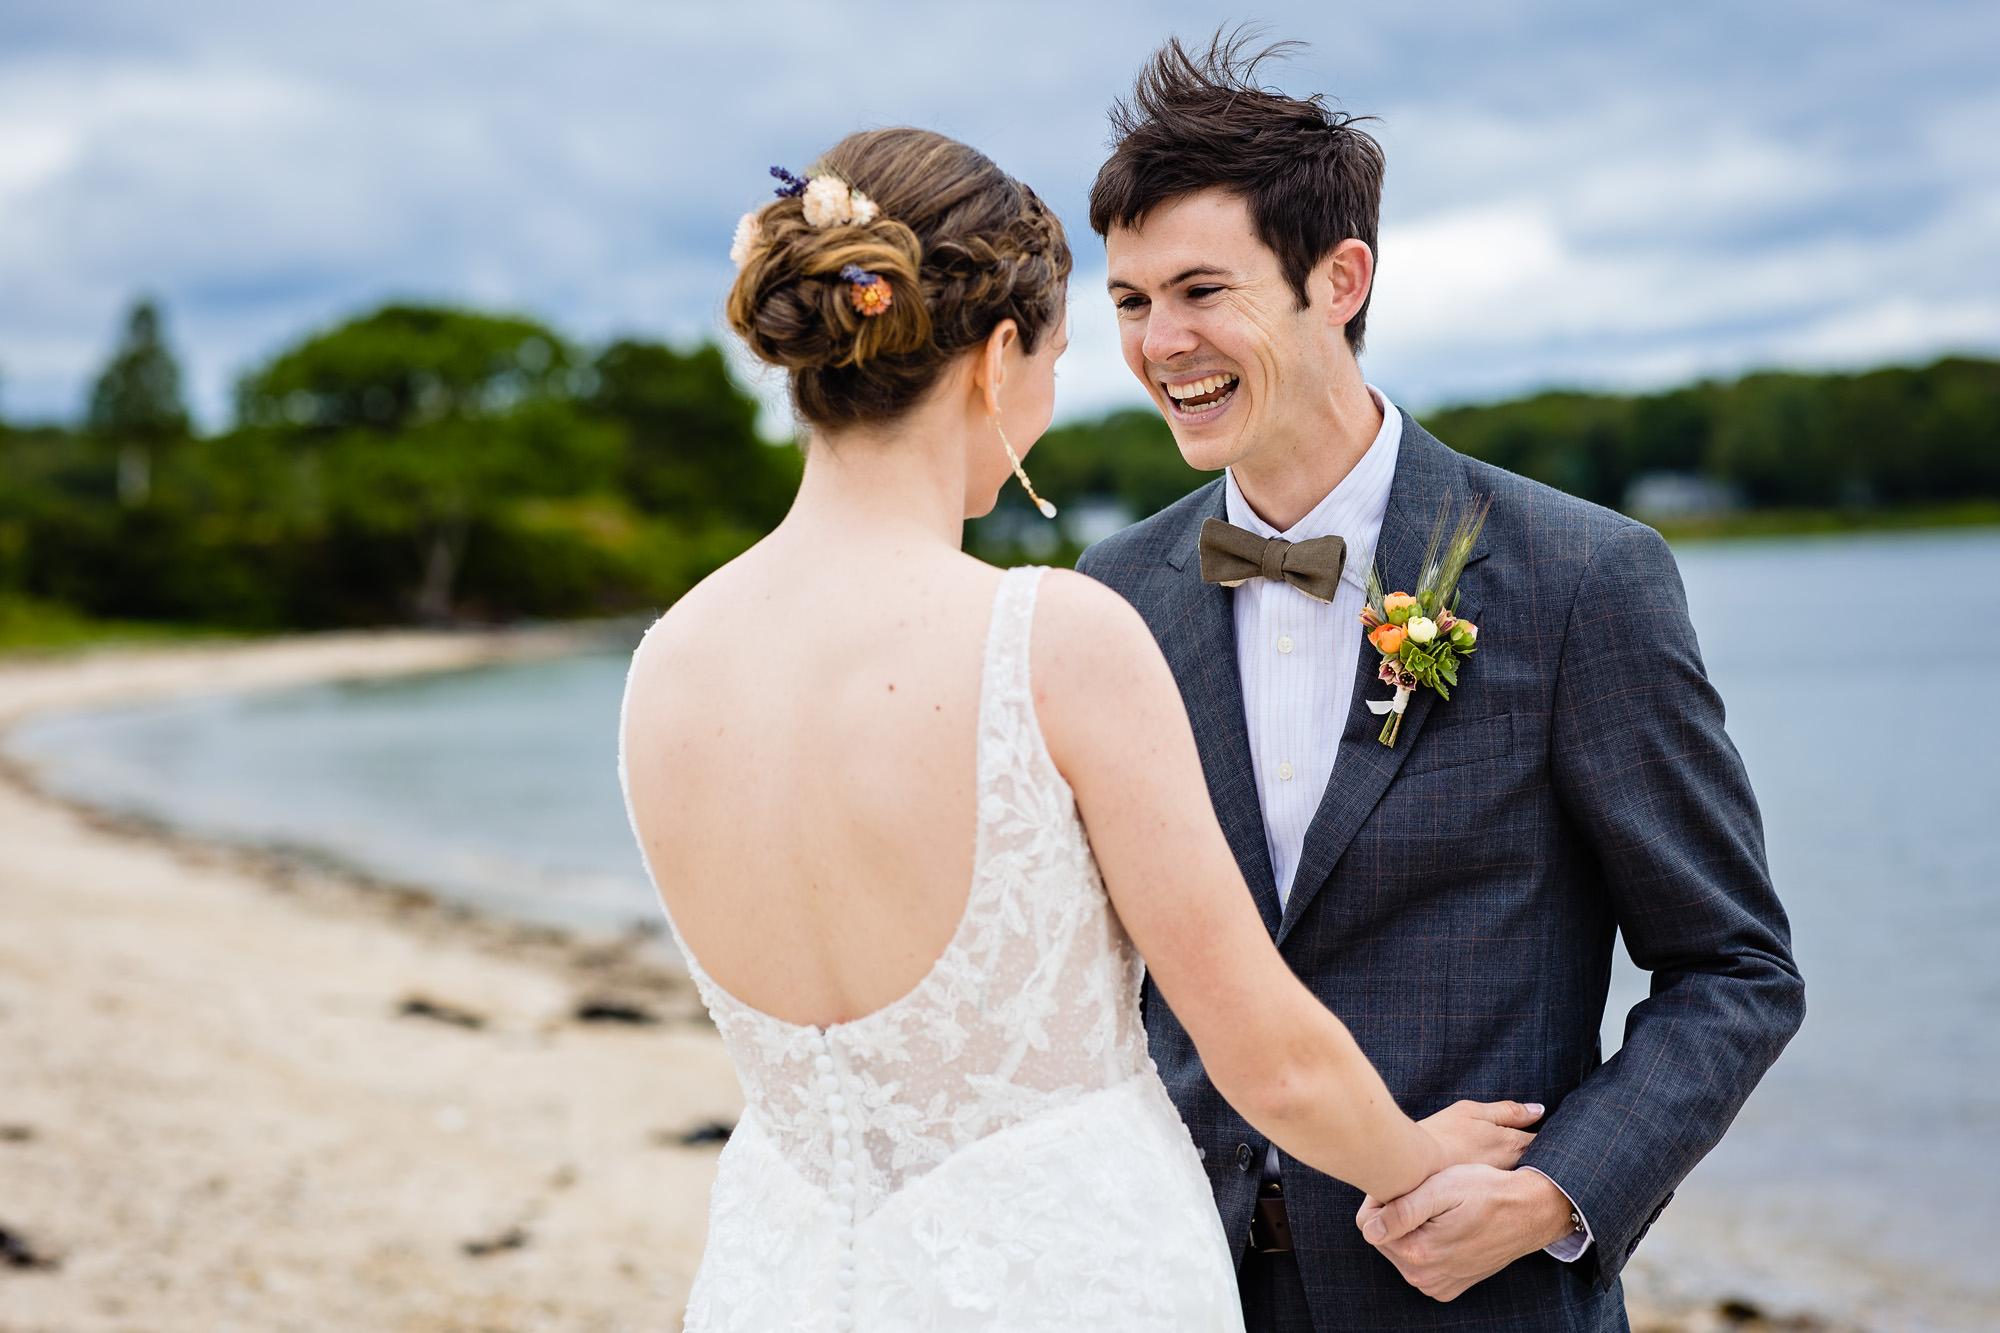 A stunning first look prior to a wedding on a beach on Chebeague Island, Maine